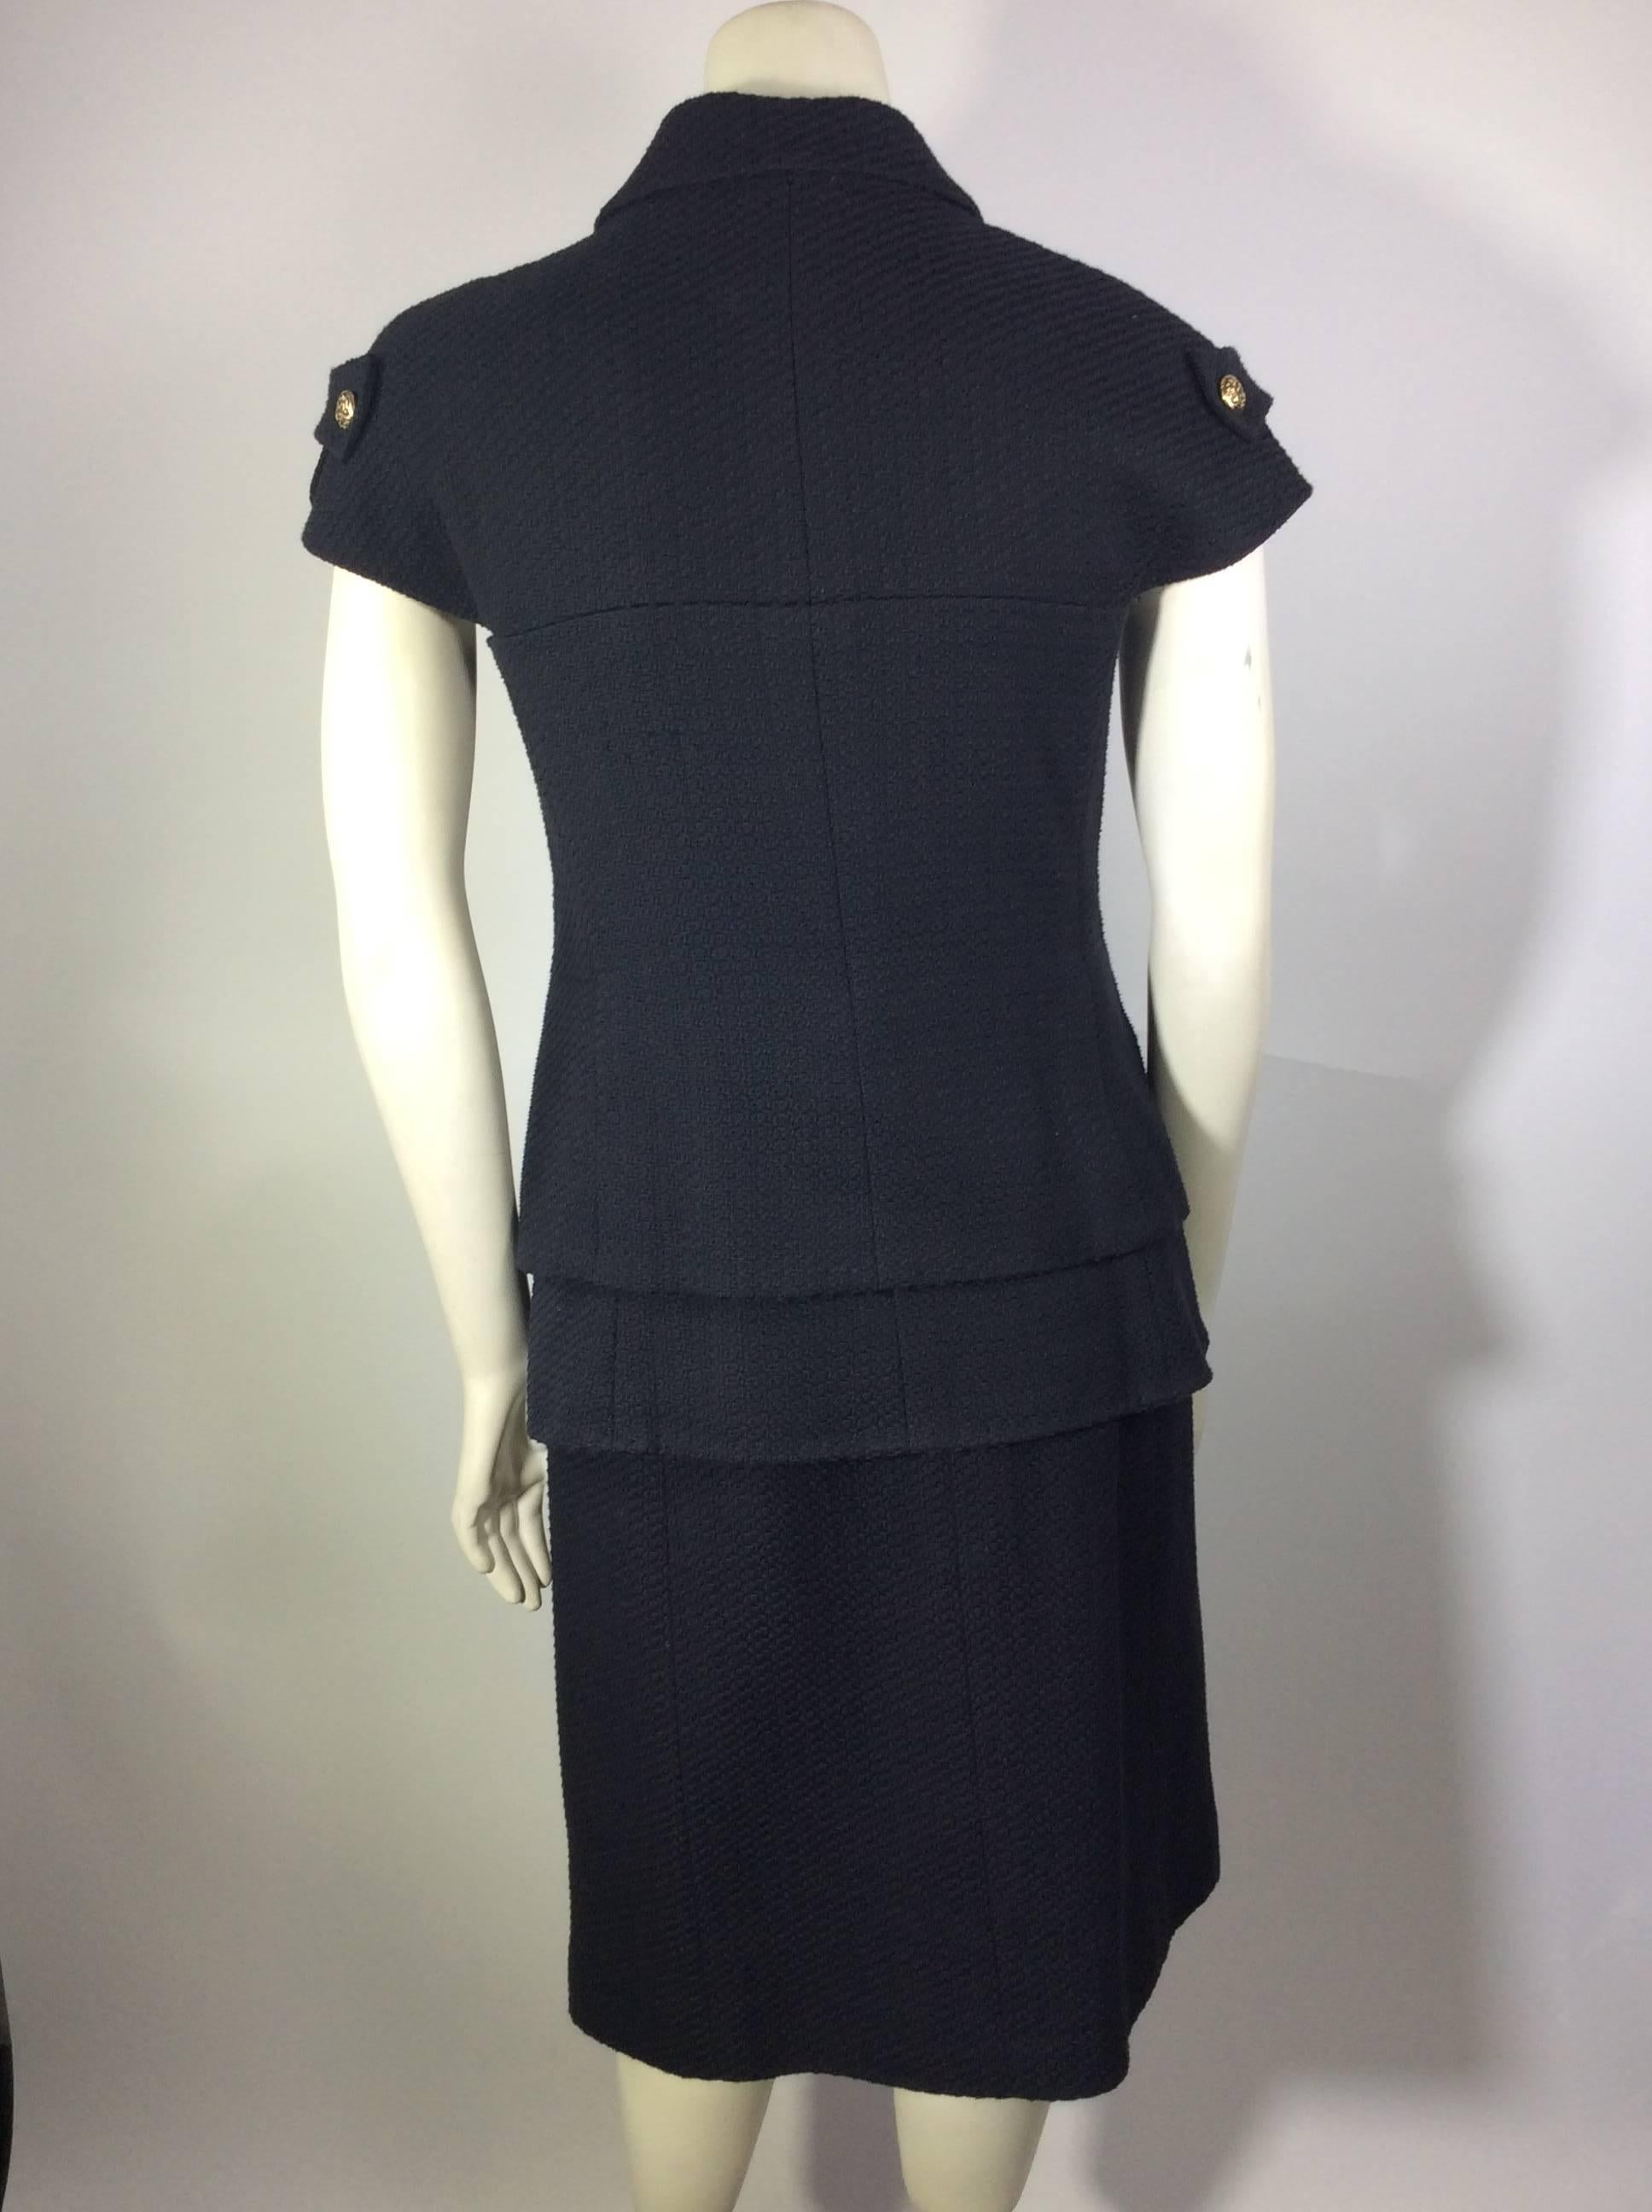 Women's Chanel 2007 Black Cotton Suit with Gold Buttons For Sale